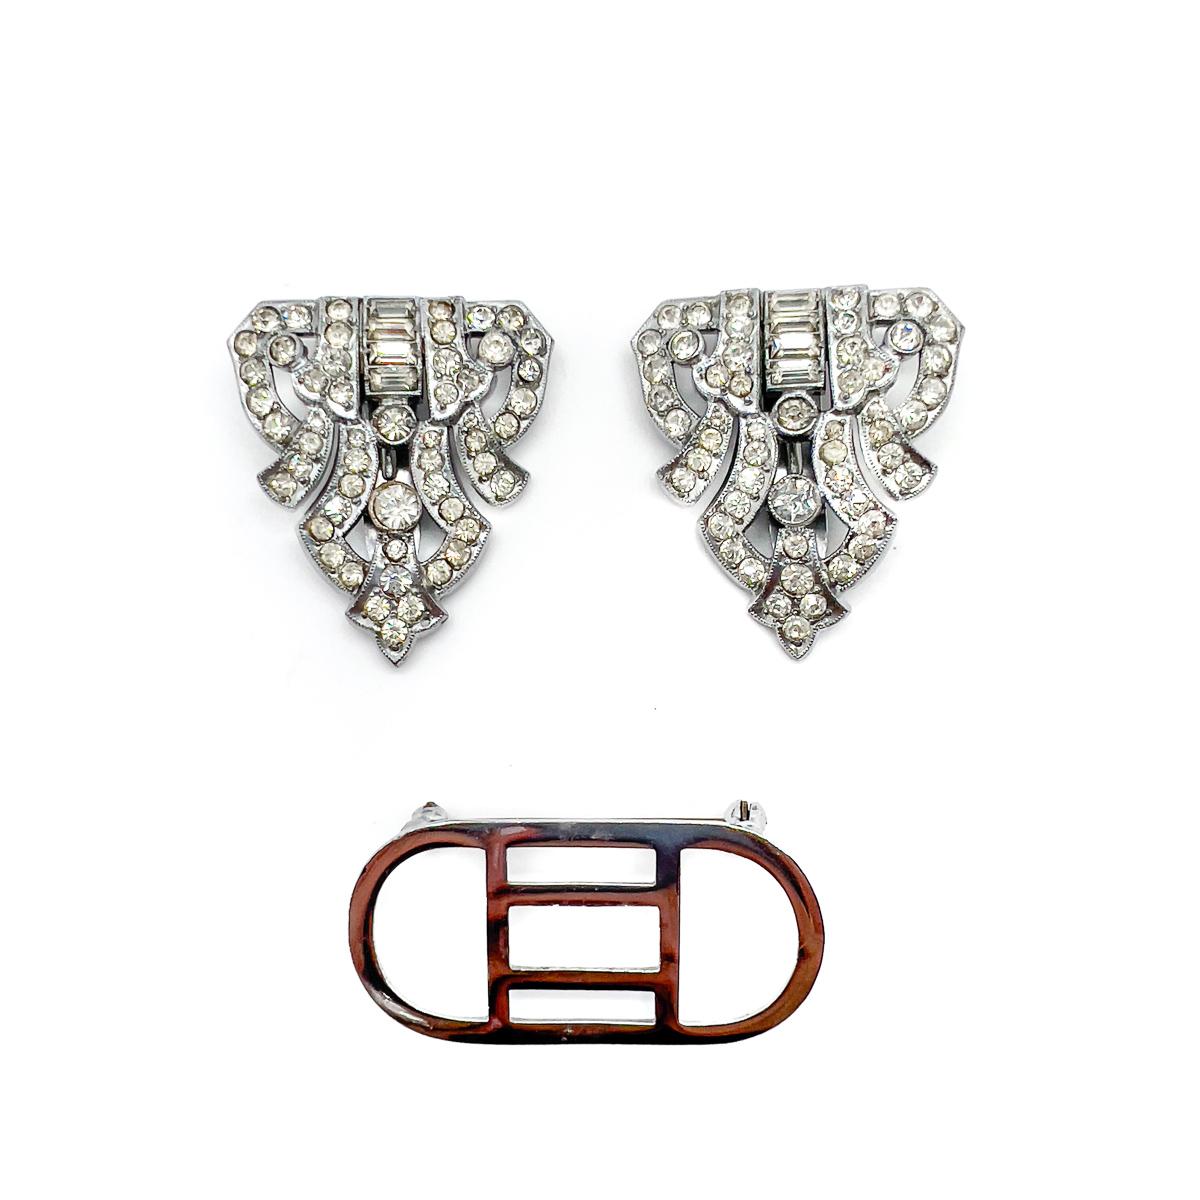 A Vintage English Art Deco Paste Double Dress Clip Brooch. Wear as a brooch or as a pair of dress clips. An effortlessly stylish work of Art Deco craftmanship.
During the 1920s & 30s the Art Deco style reigned supreme. The bold new look flowed